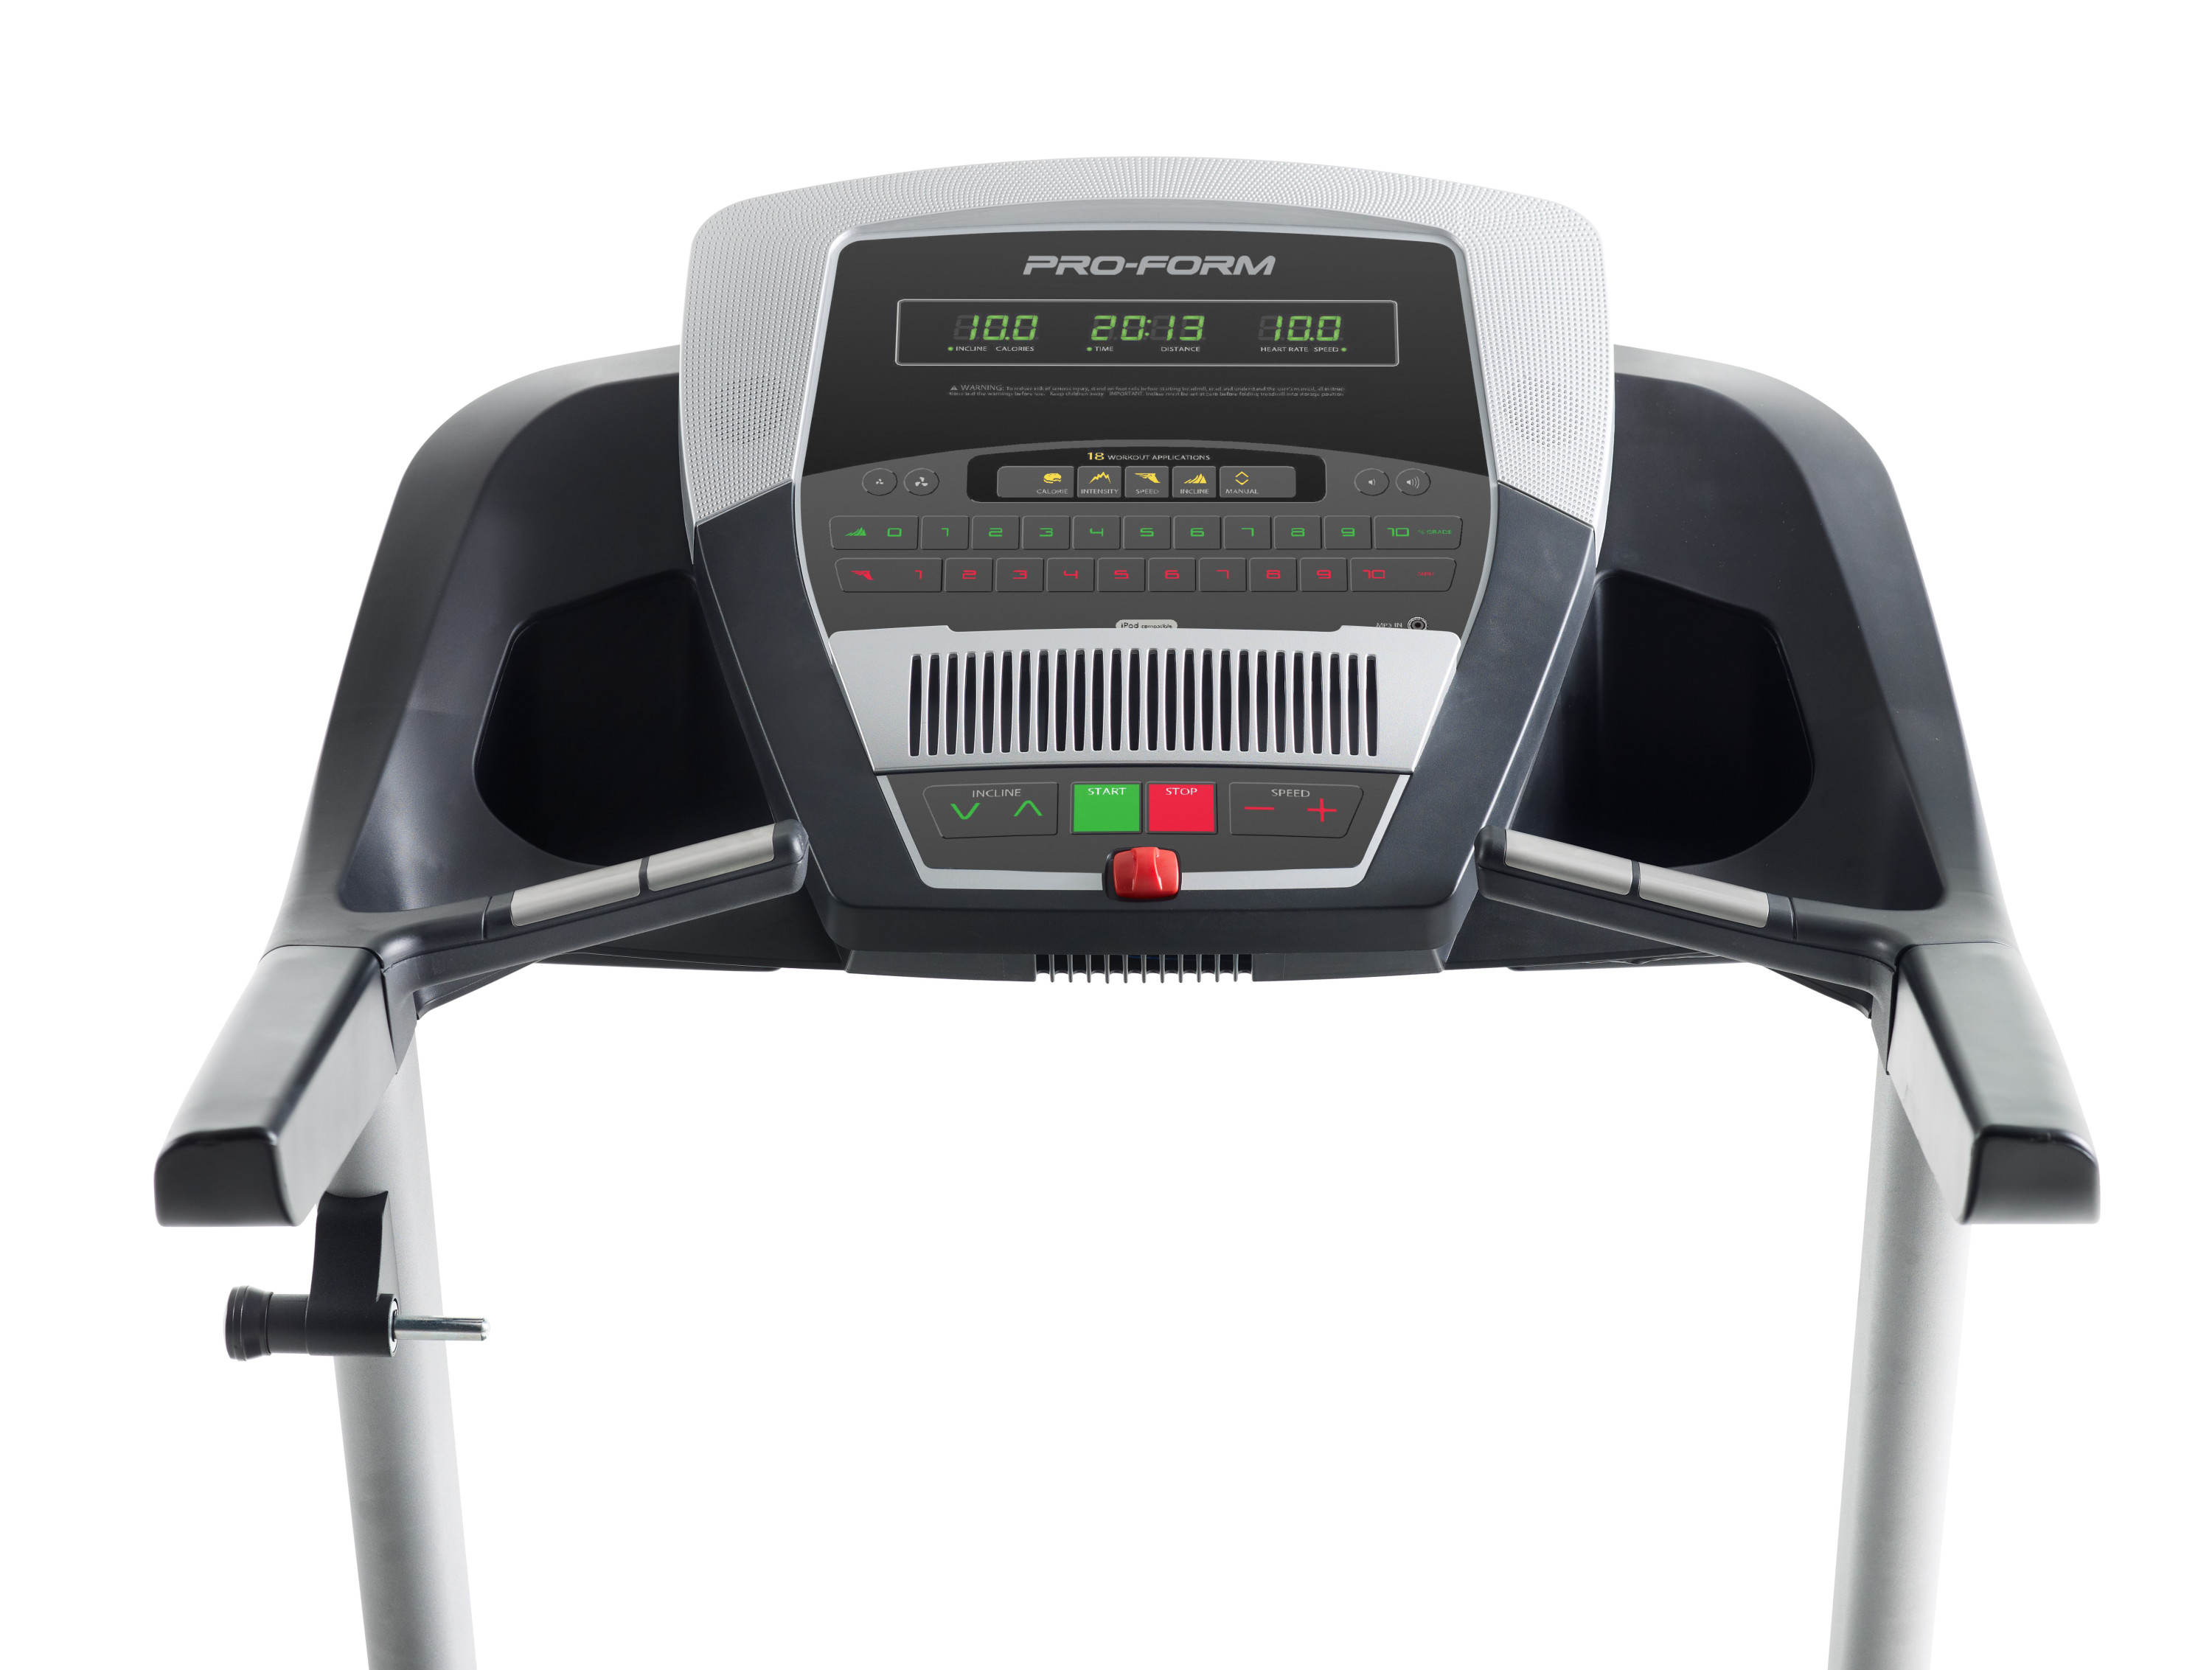 ProForm Trainer 720 Folding Treadmill with 10% Incline Training and 10 MPH Speed Controls - image 2 of 5